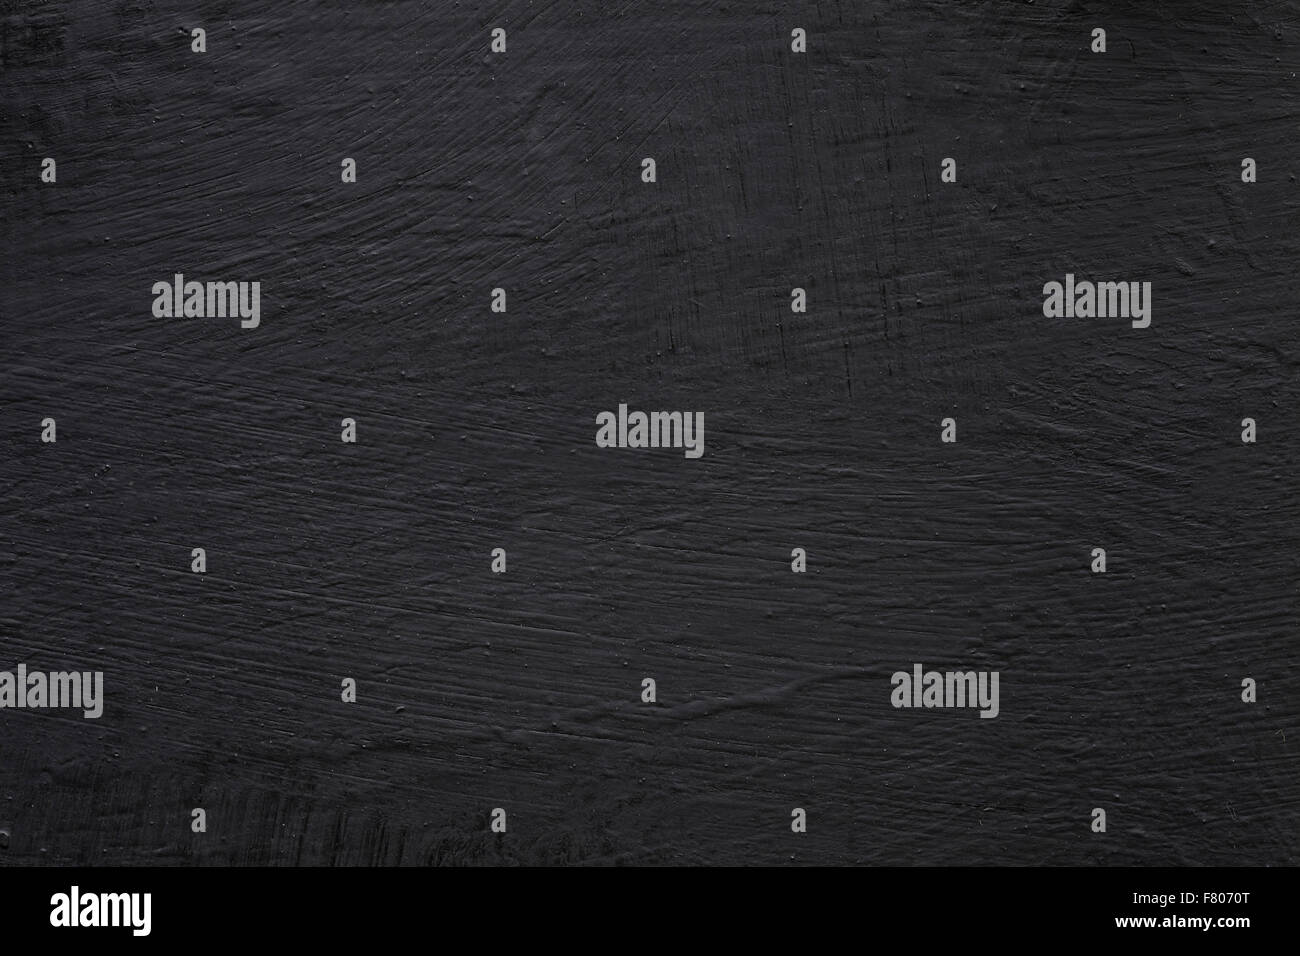 black abstract background or paint scratched texture Stock Photo